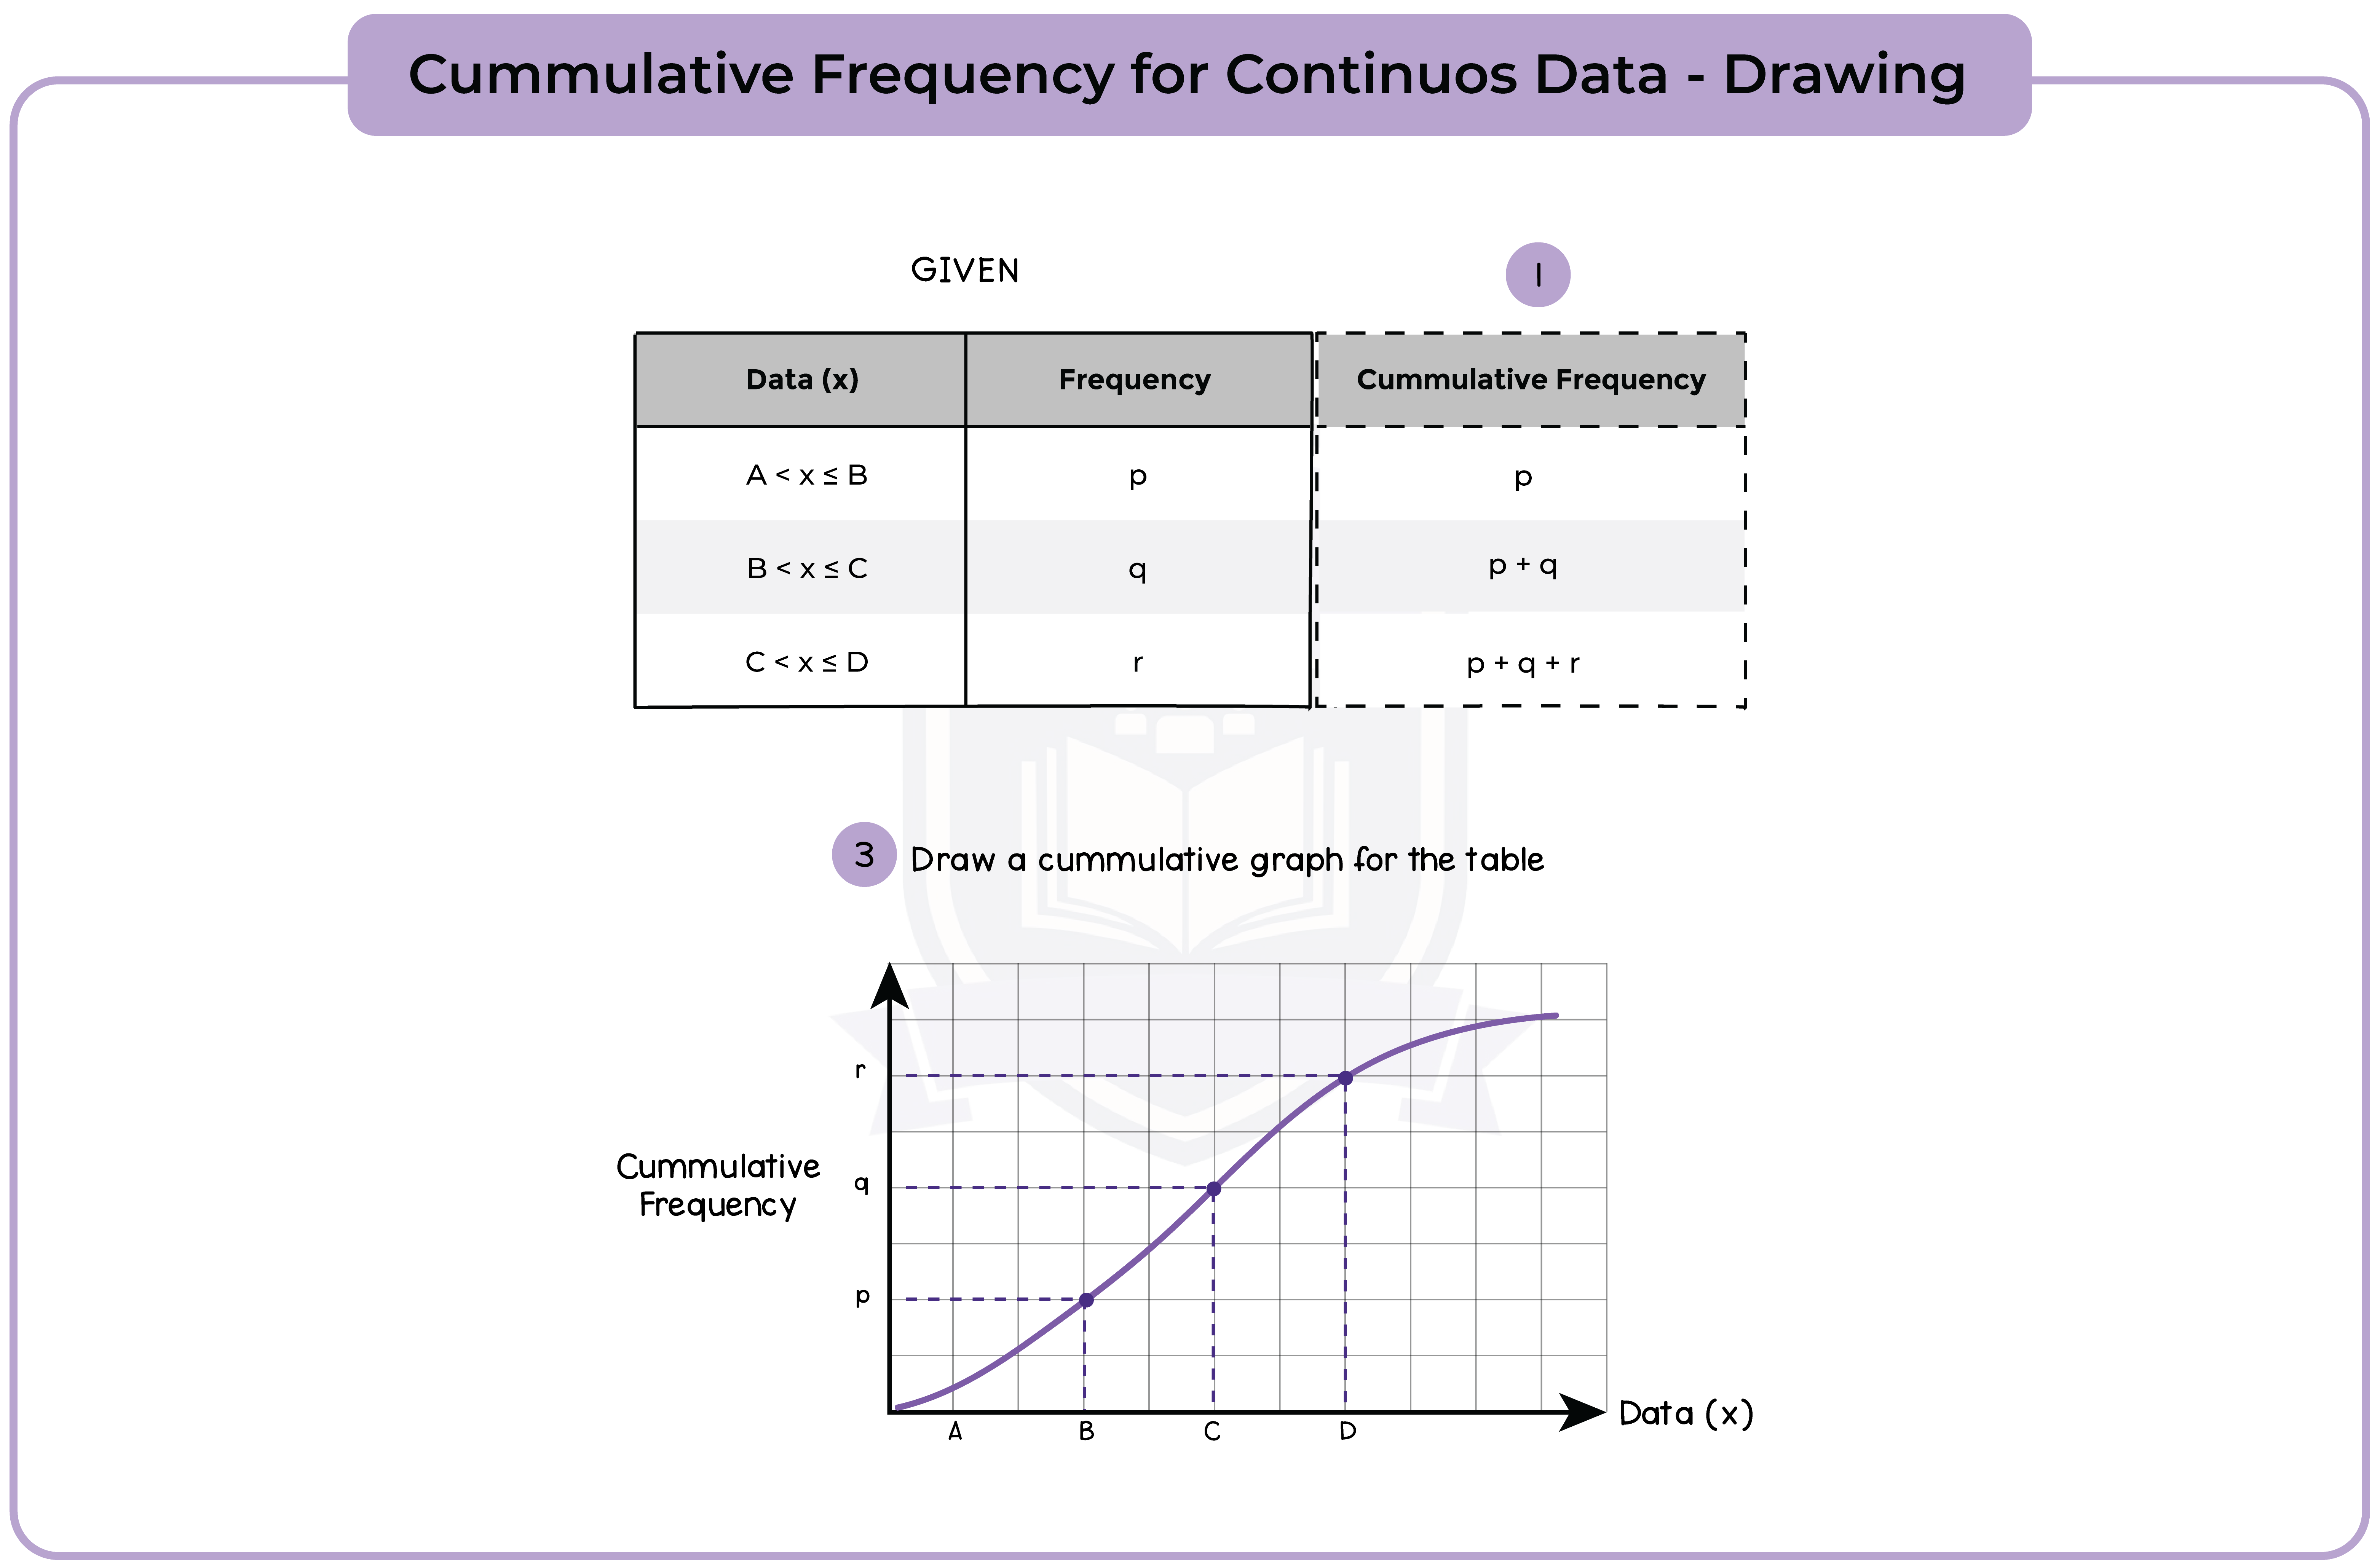 edexcel_igcse_mathematics a_topic 38_graphical representation of data_006_Cummulative Frequency for Continuous Data - Drawing